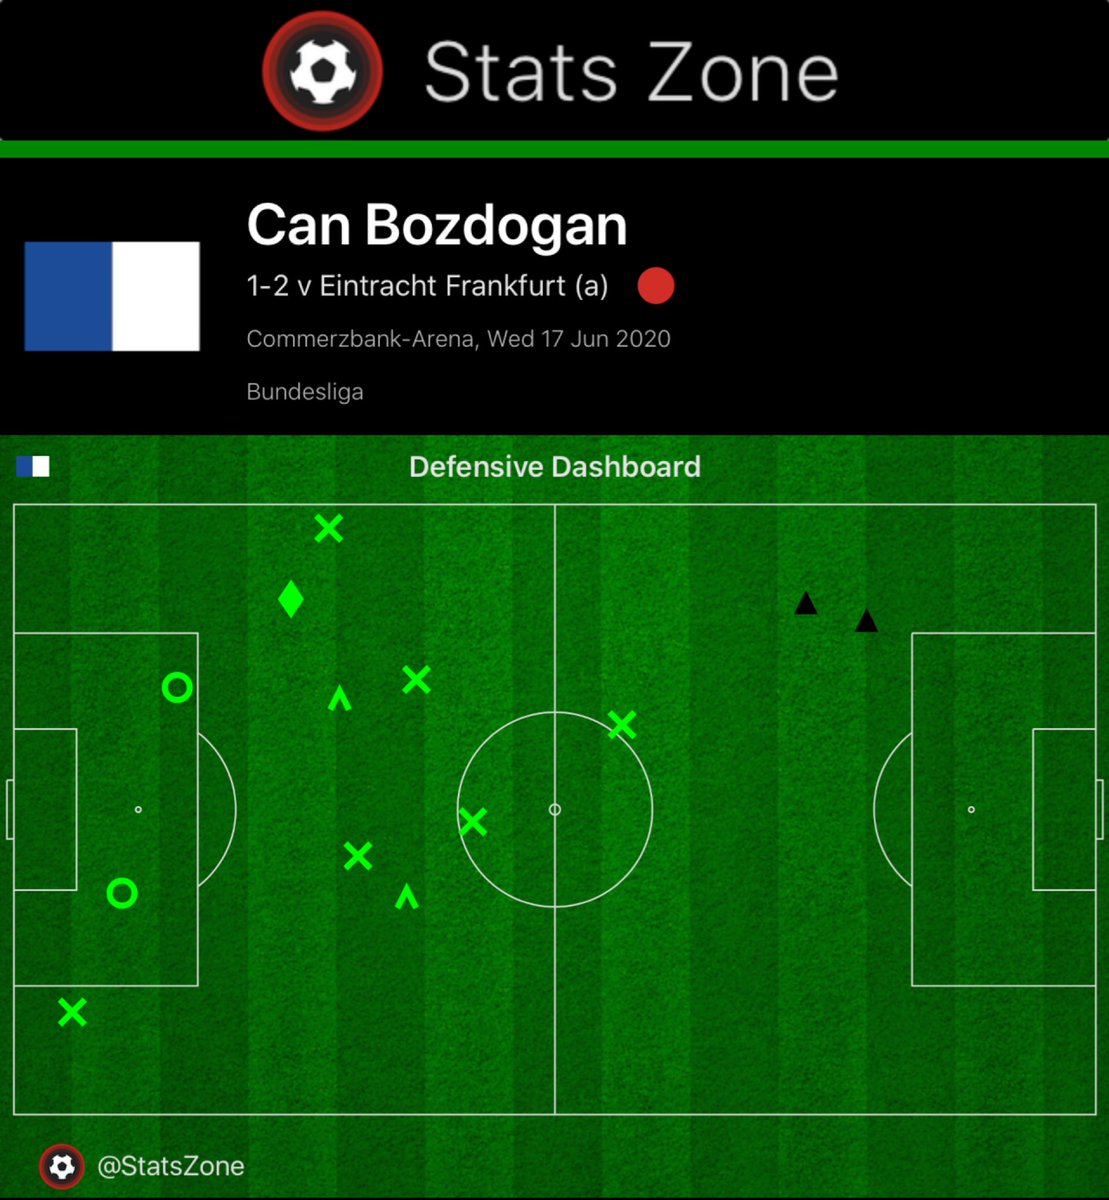 Against Frankfurt, Bozdogan was a serious contributor off the ball. Below is his defensive dashboard from this game. He actually received two yellow cards in this game owing to his eager and aggressive approach though he can consider himself hard done by (Stats Zone).